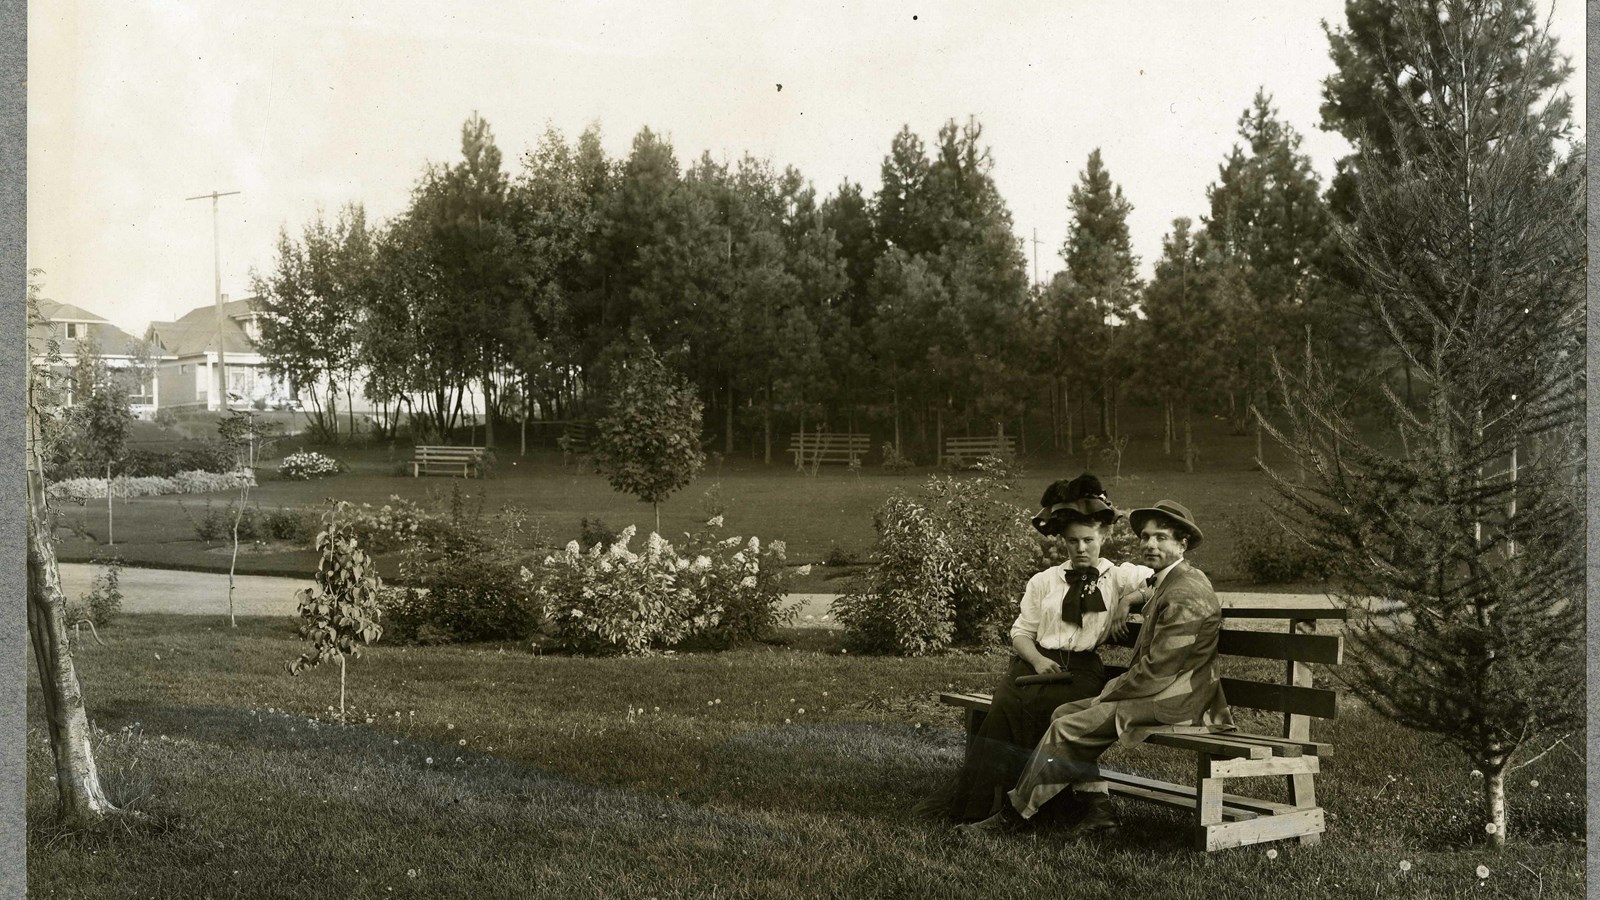 Black and white of bench with two people on flat grassy area with path lined with shrubs